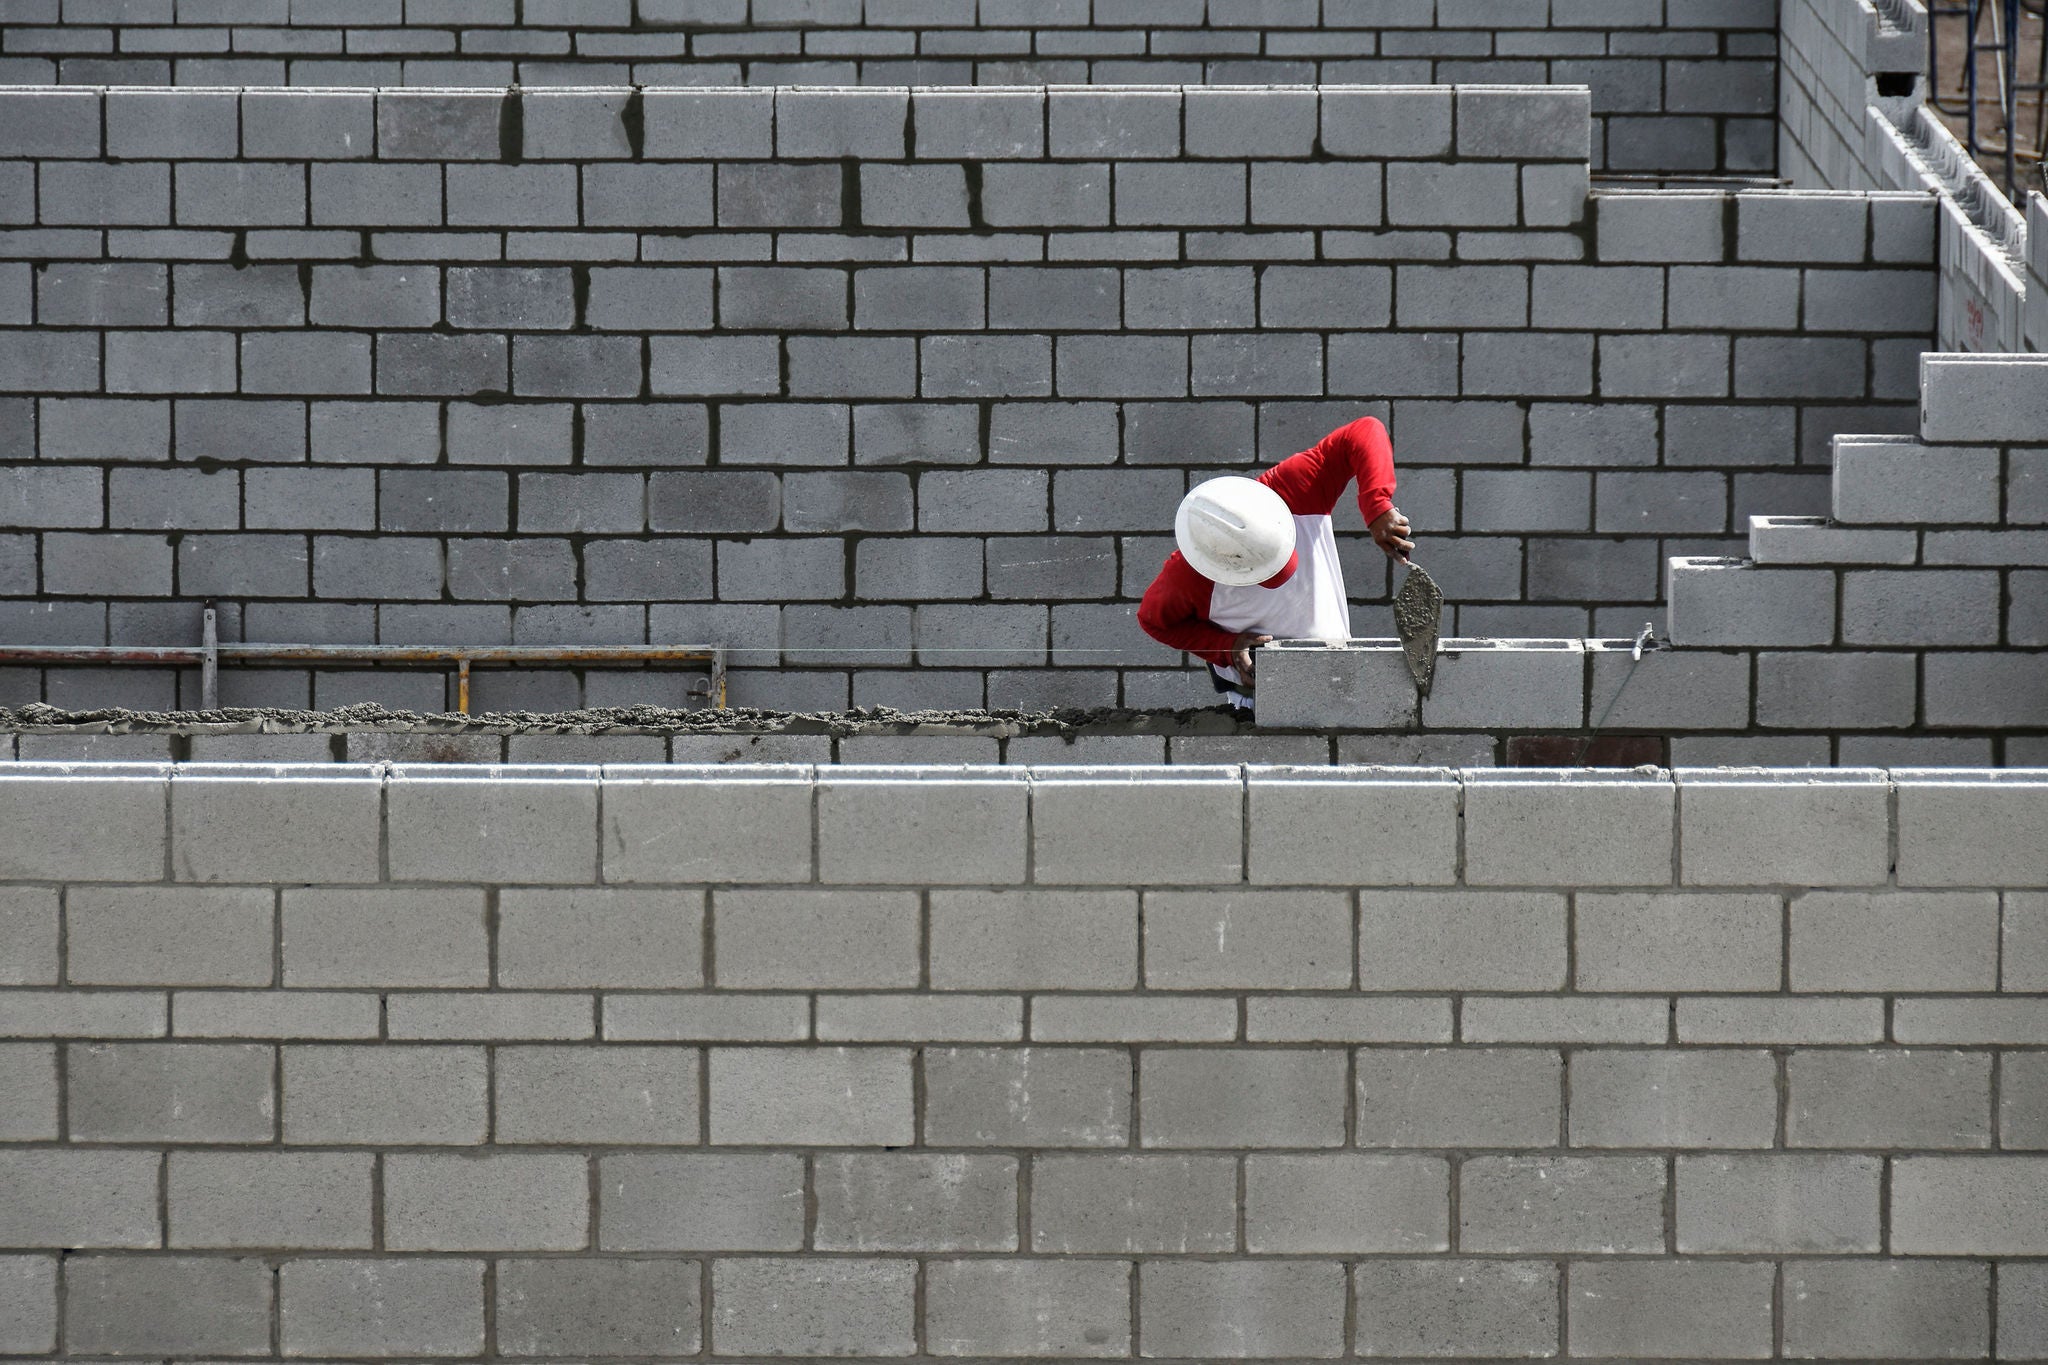 A man constructs a brick wall with brick layers.